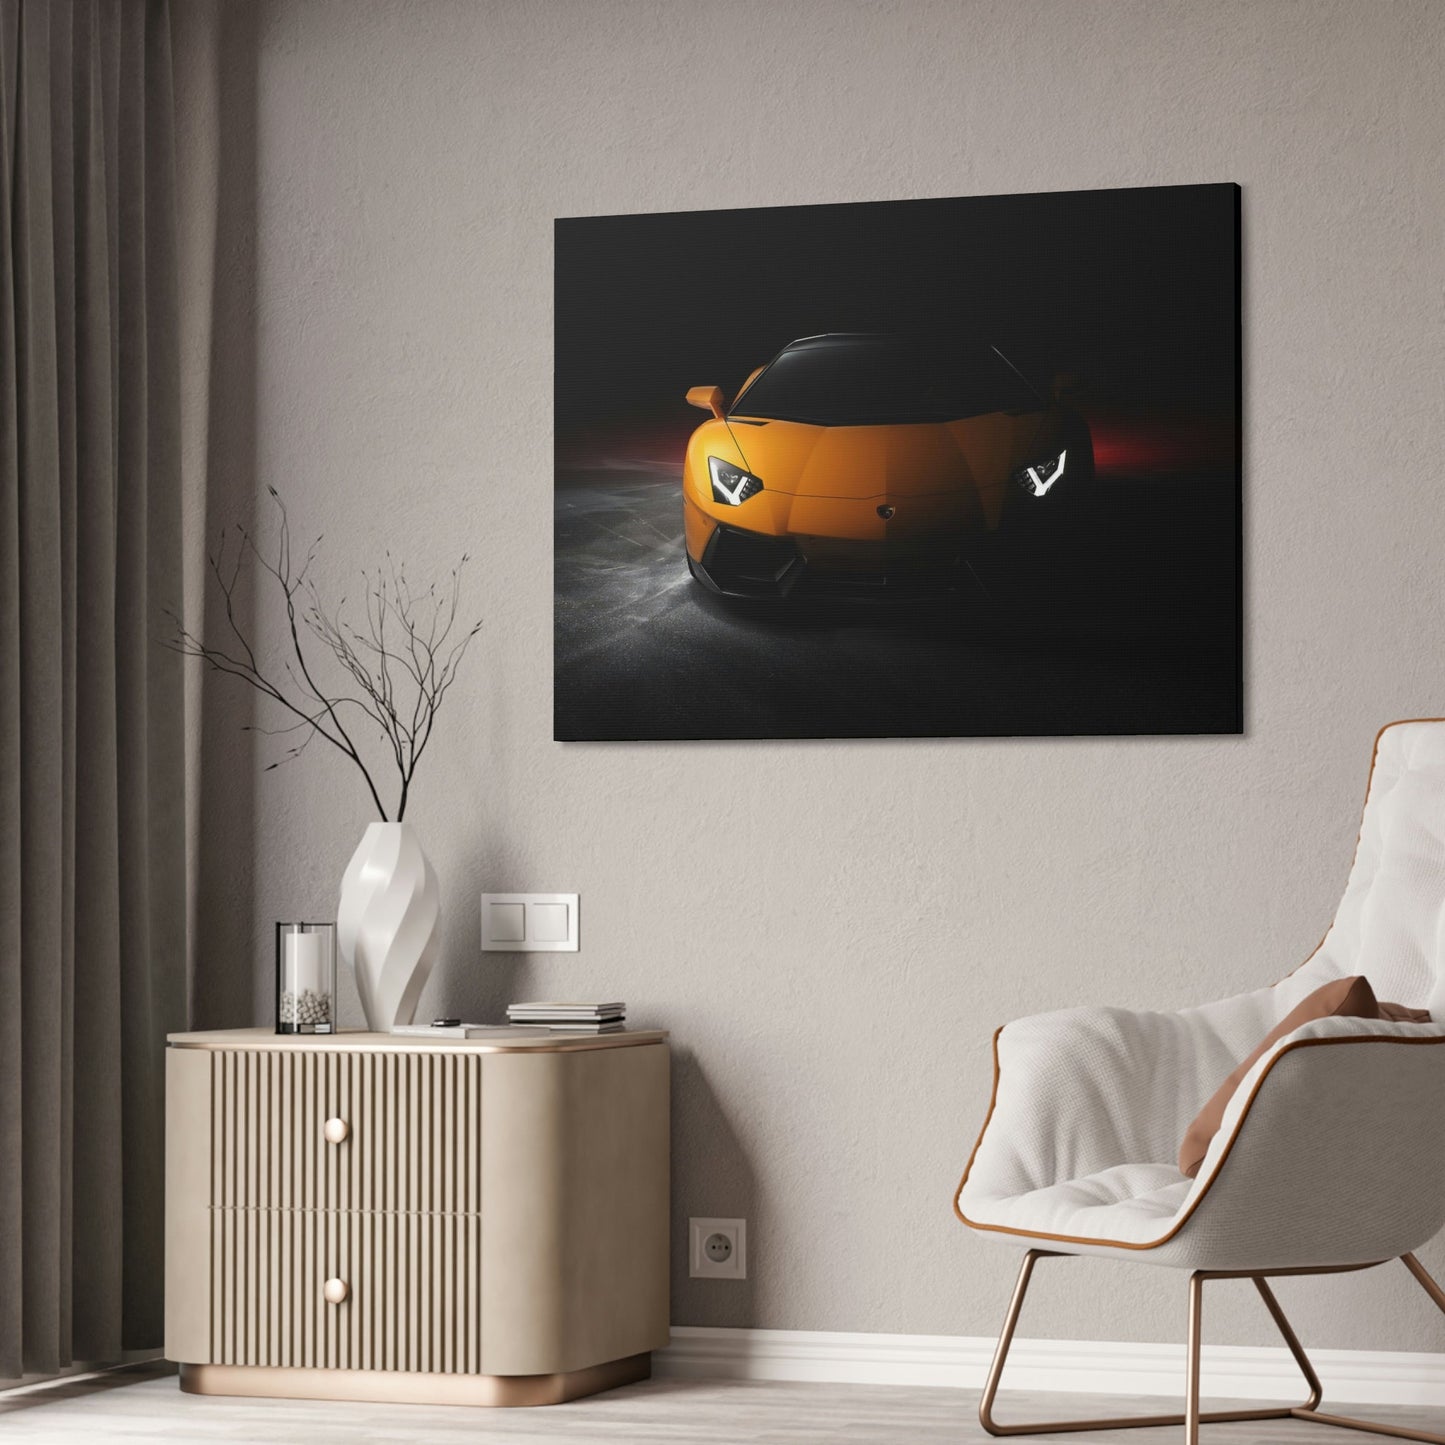 Lamborghini The Power of Elegance: Art and Wall Decor on Natural Canvas